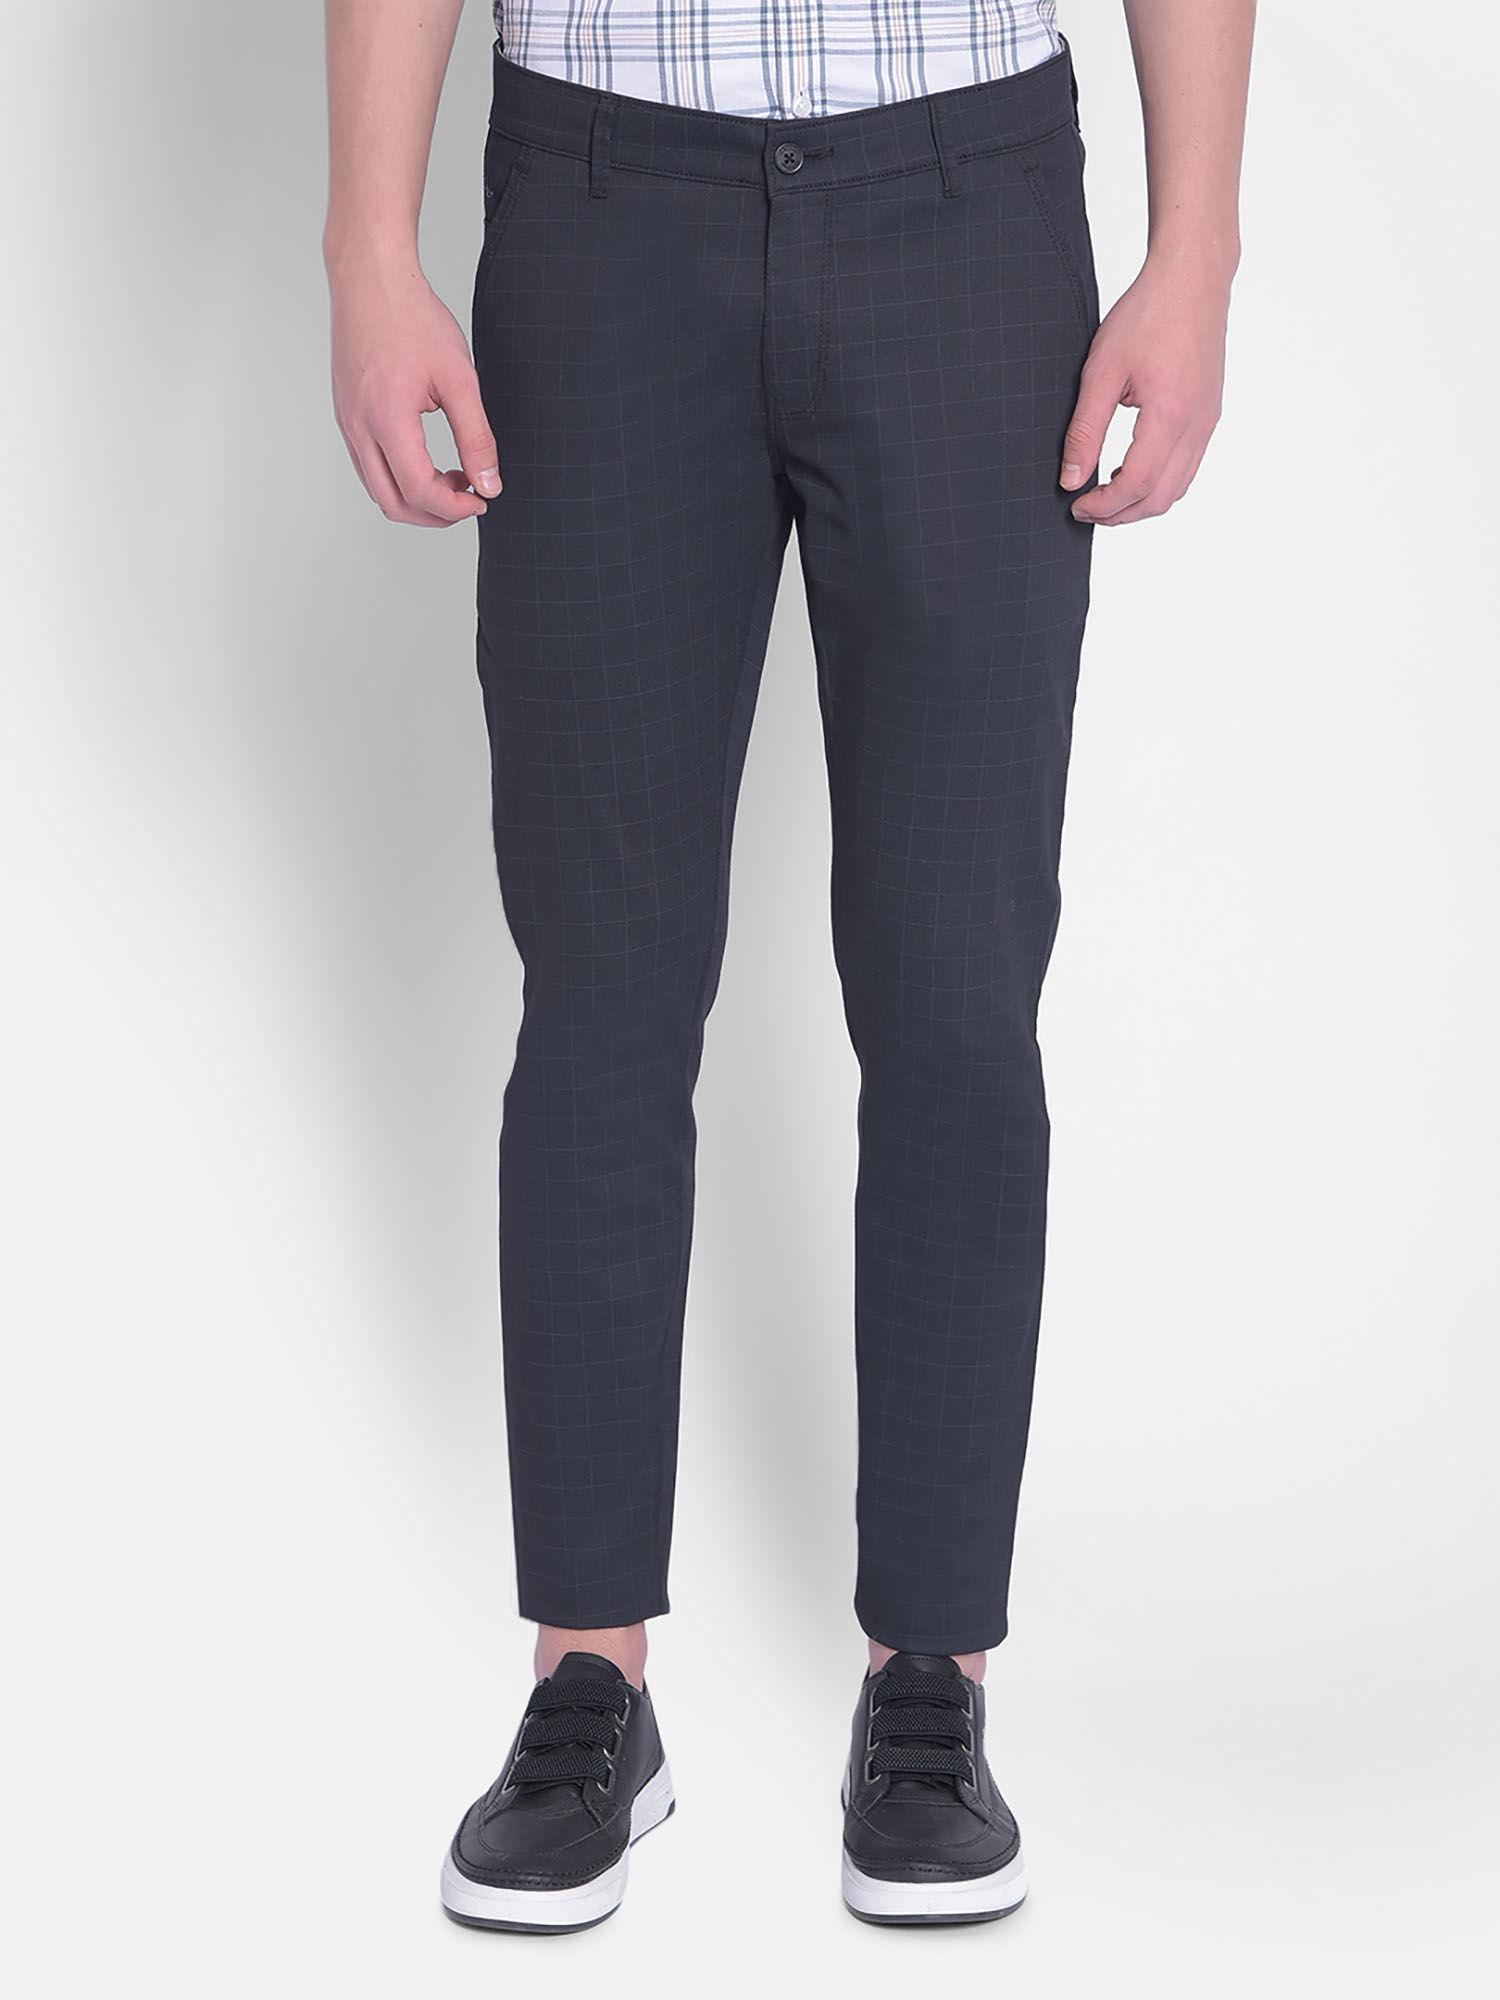 mens-black-checked-trousers